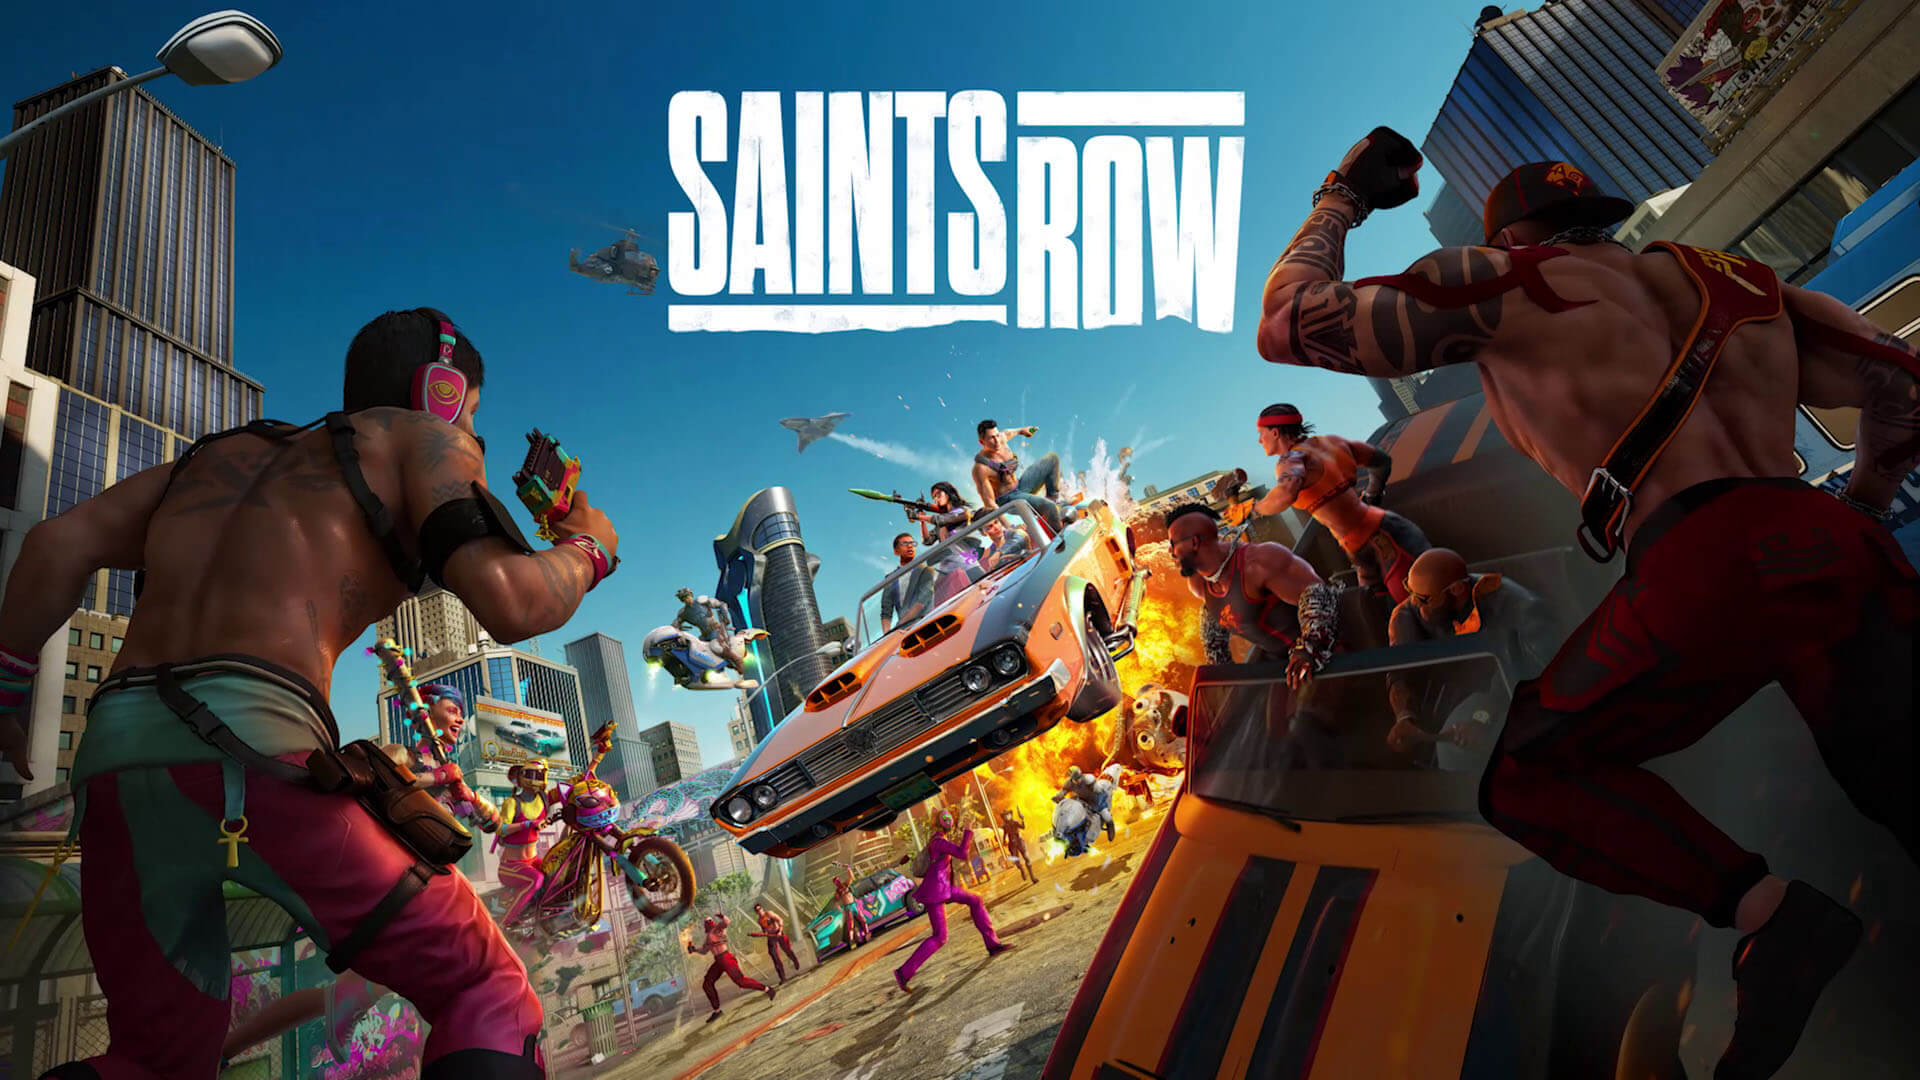 Saints Row Shows Explosive Combat, Open World, and More in New